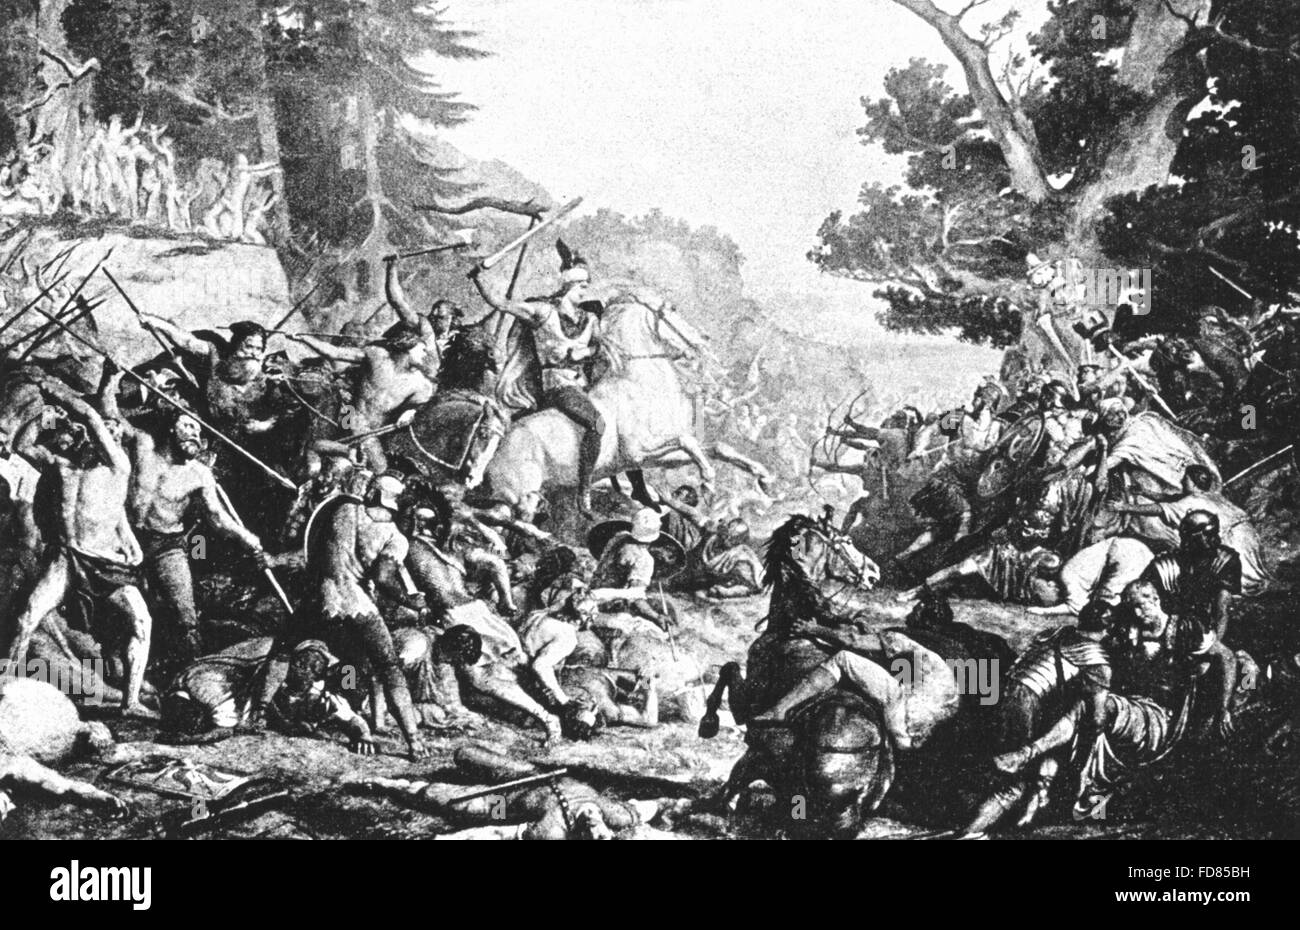 Representation of the Battle of the Teutoburg Forest in AD 9 Stock Photo